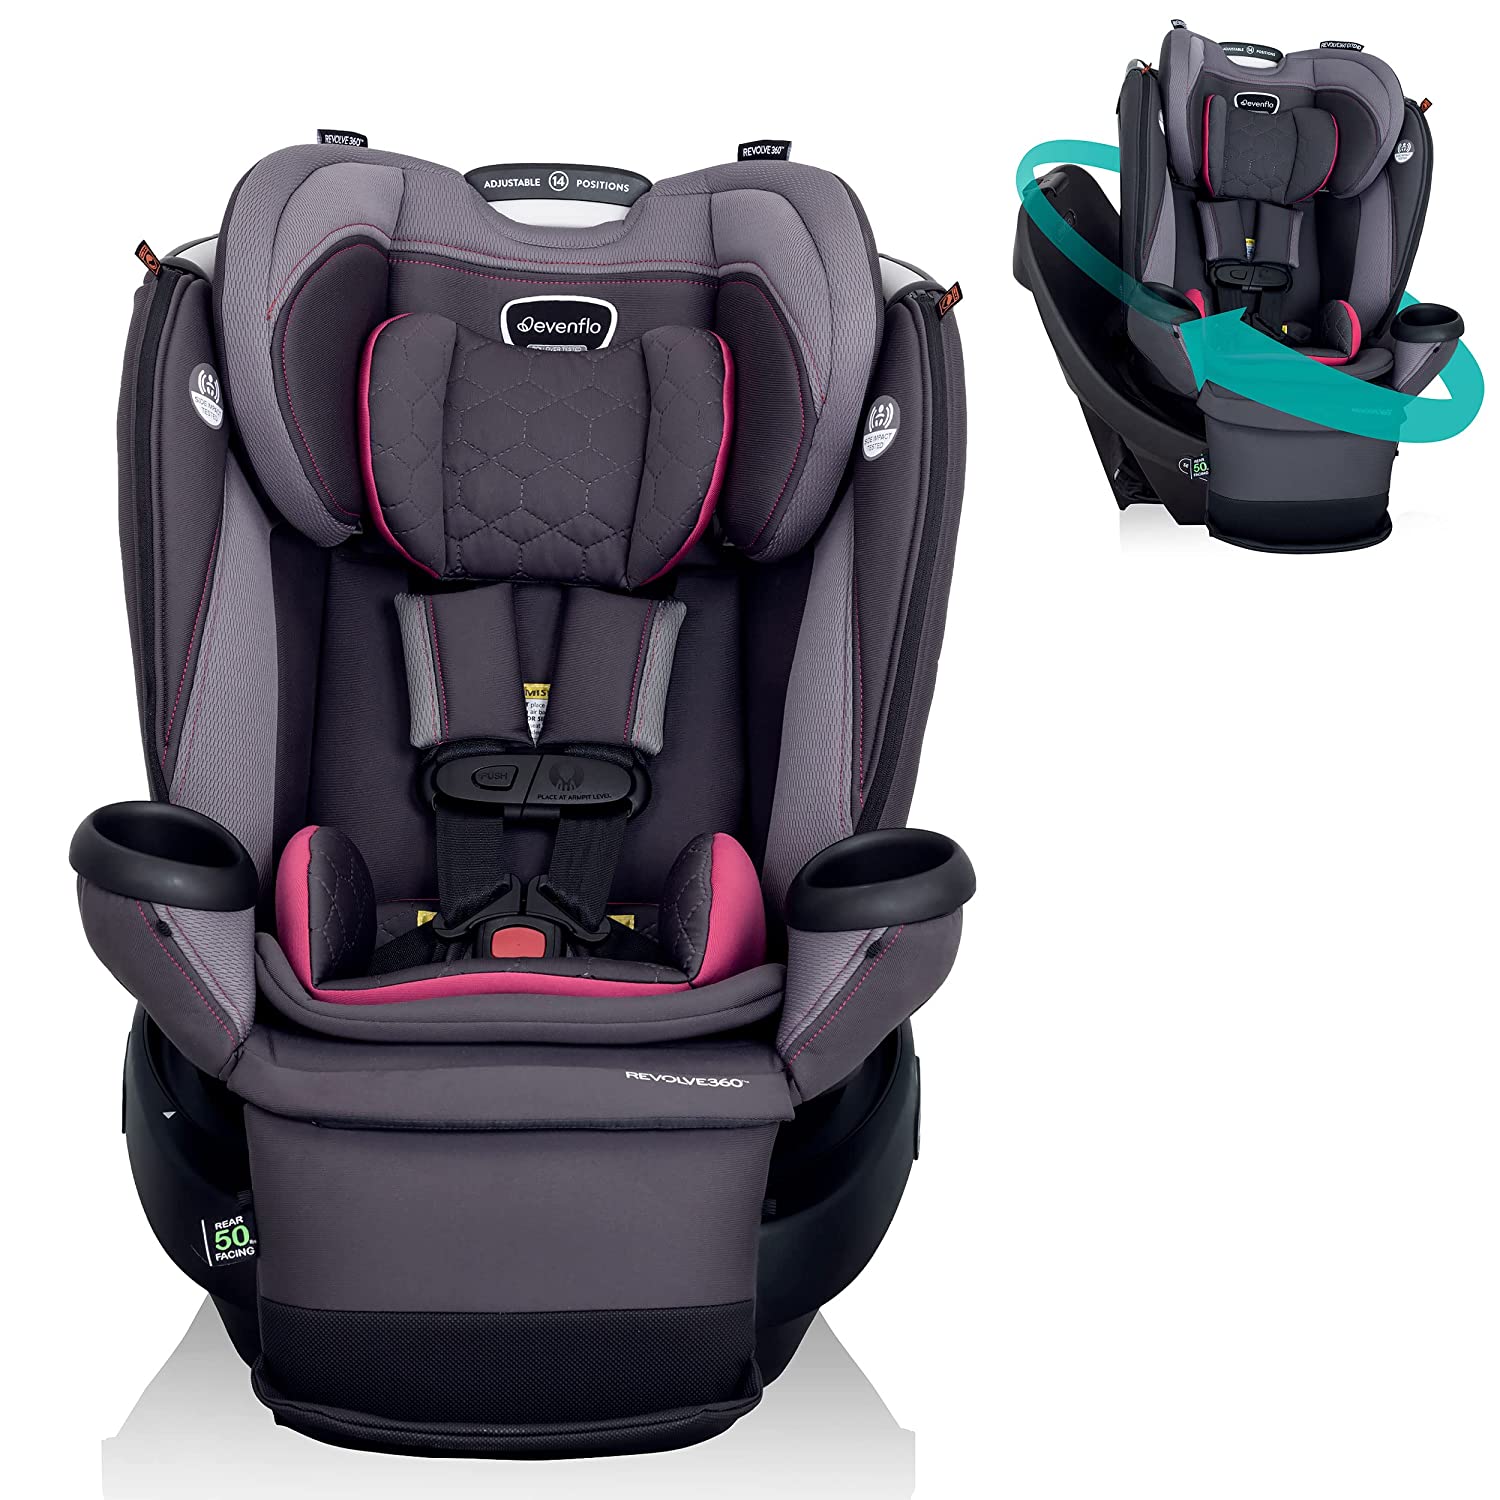 Evenflo Rowe Secure Reclining Convertible Car Seat